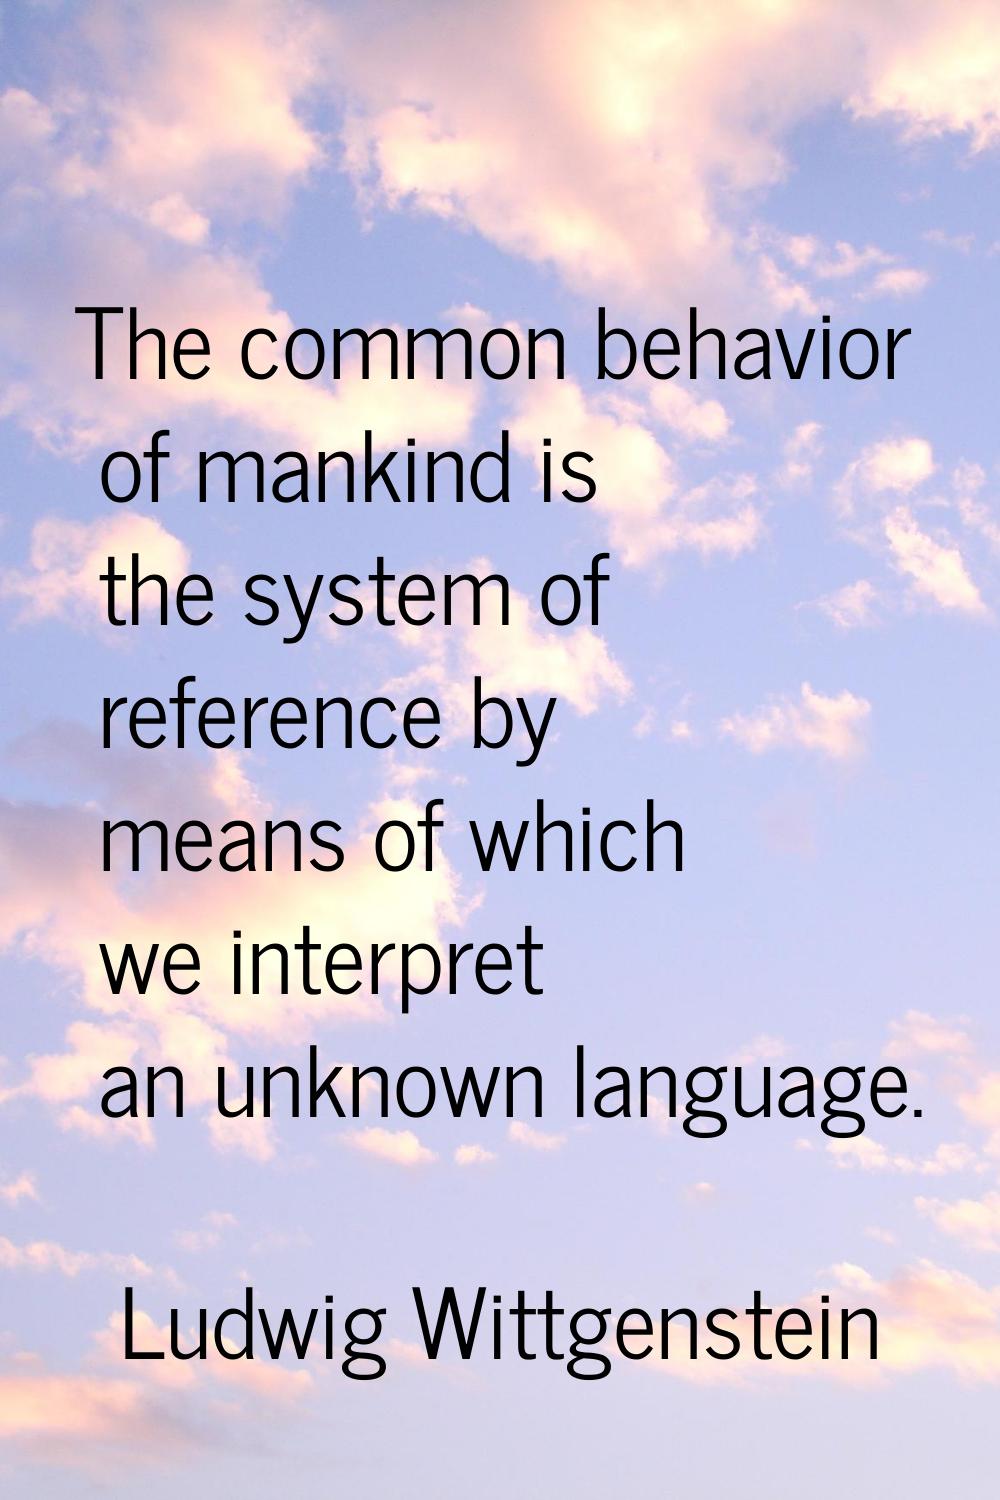 The common behavior of mankind is the system of reference by means of which we interpret an unknown